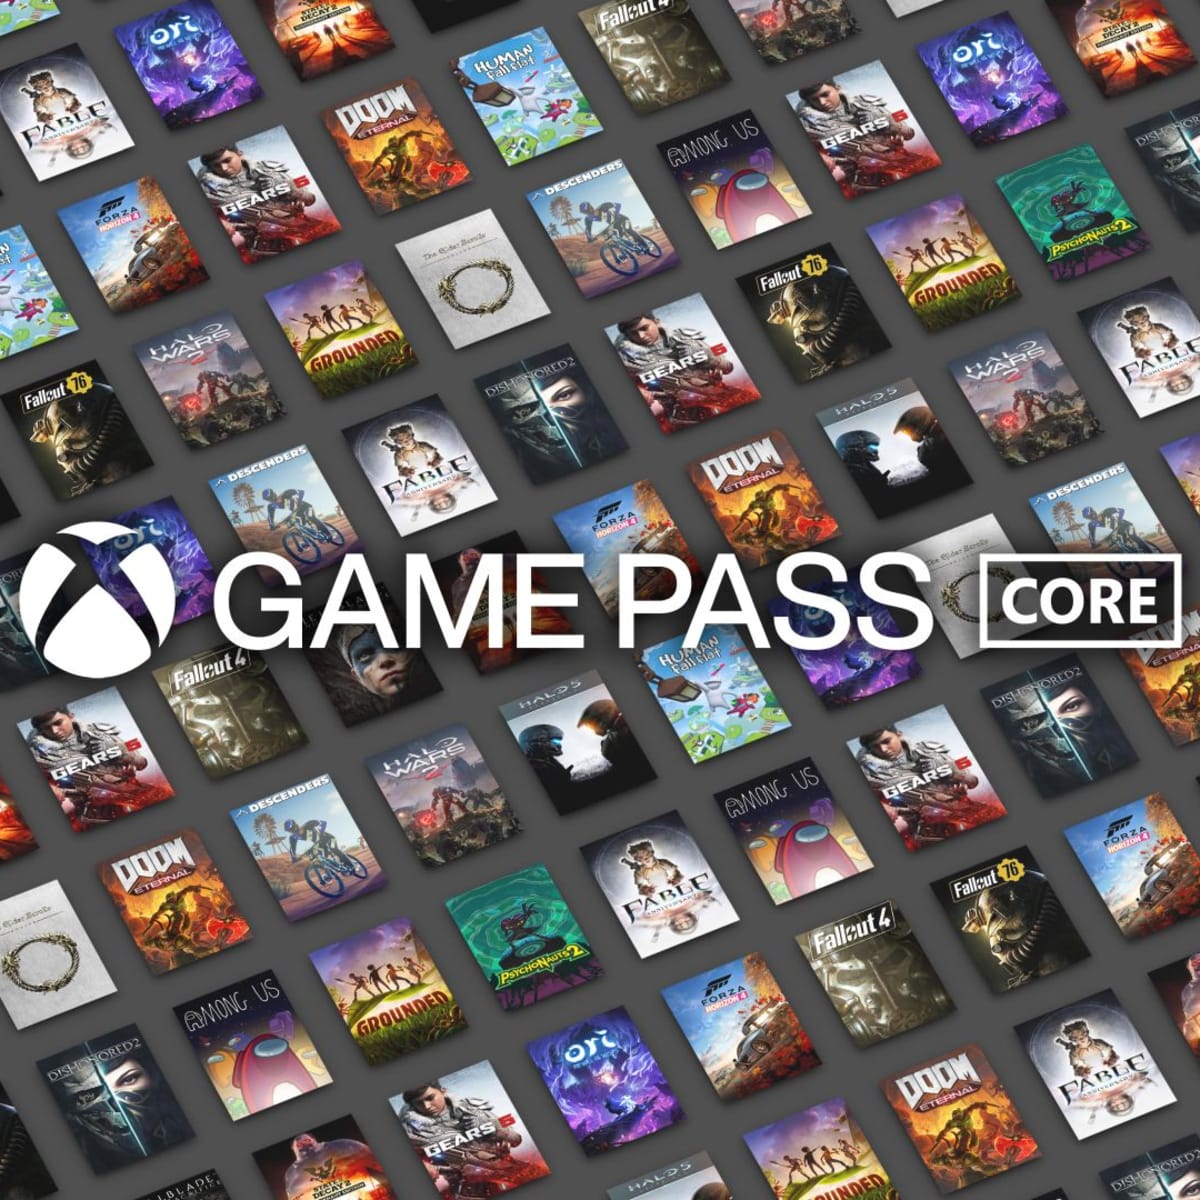 Xbox Live Gold Is Dead, Long Live Xbox Game Pass Core